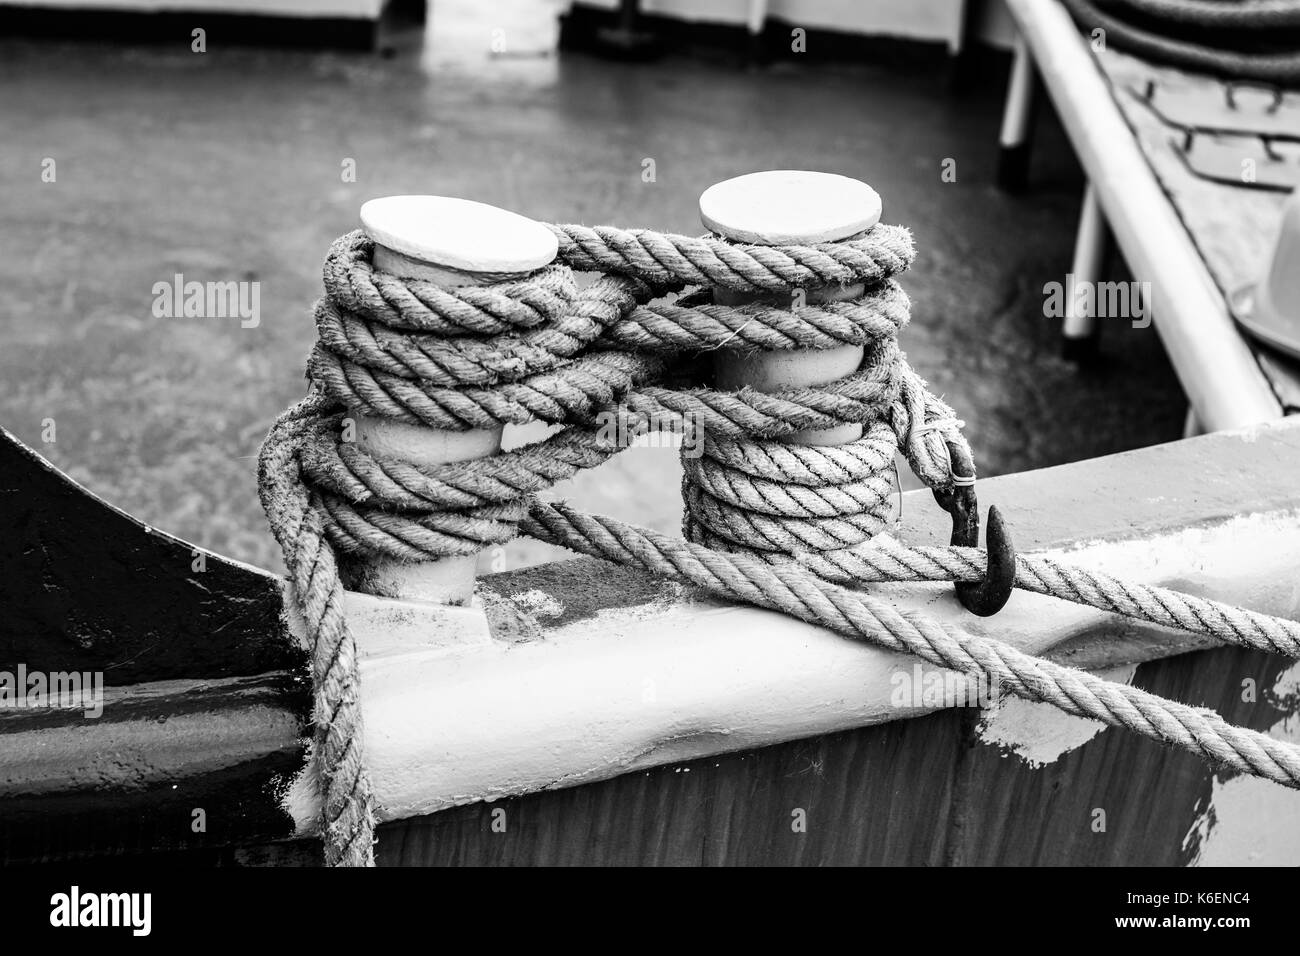 Close-up nautical knot rope tied around stake on boat or ship boat mooring rope. B&W Picture Stock Photo